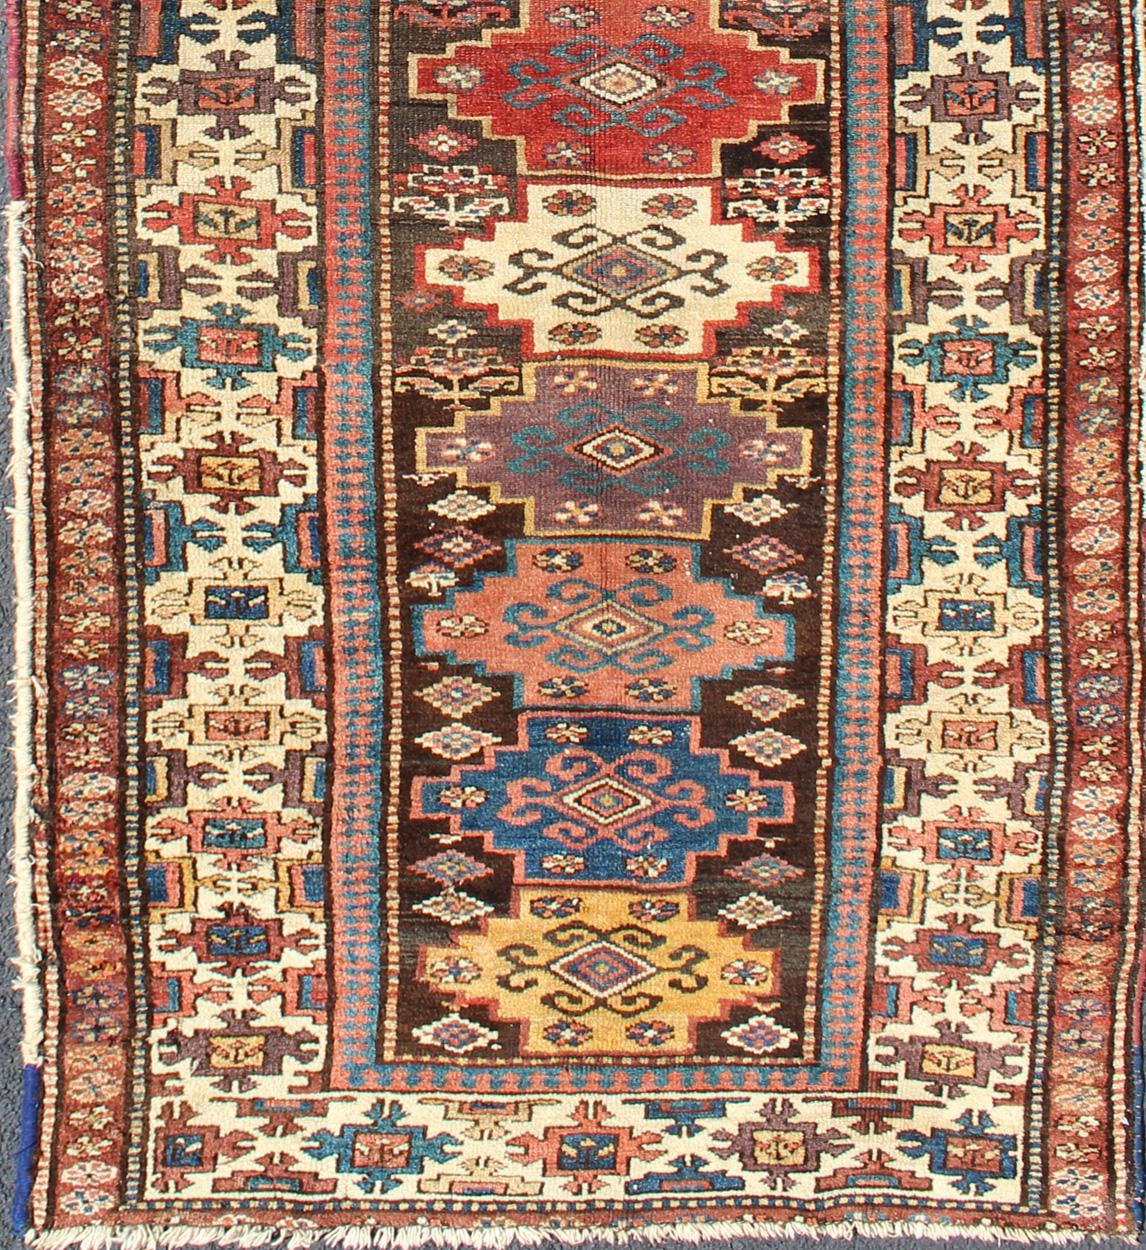 Northwest Persian antique runner with geometric design in multicolored tones, rug zir-12, country of origin / type: Iran / N.W. Persian Tribal, circa 1900.

This jewel-toned antique N.W. Persian rug, circa 1900, features a unique blend of colors